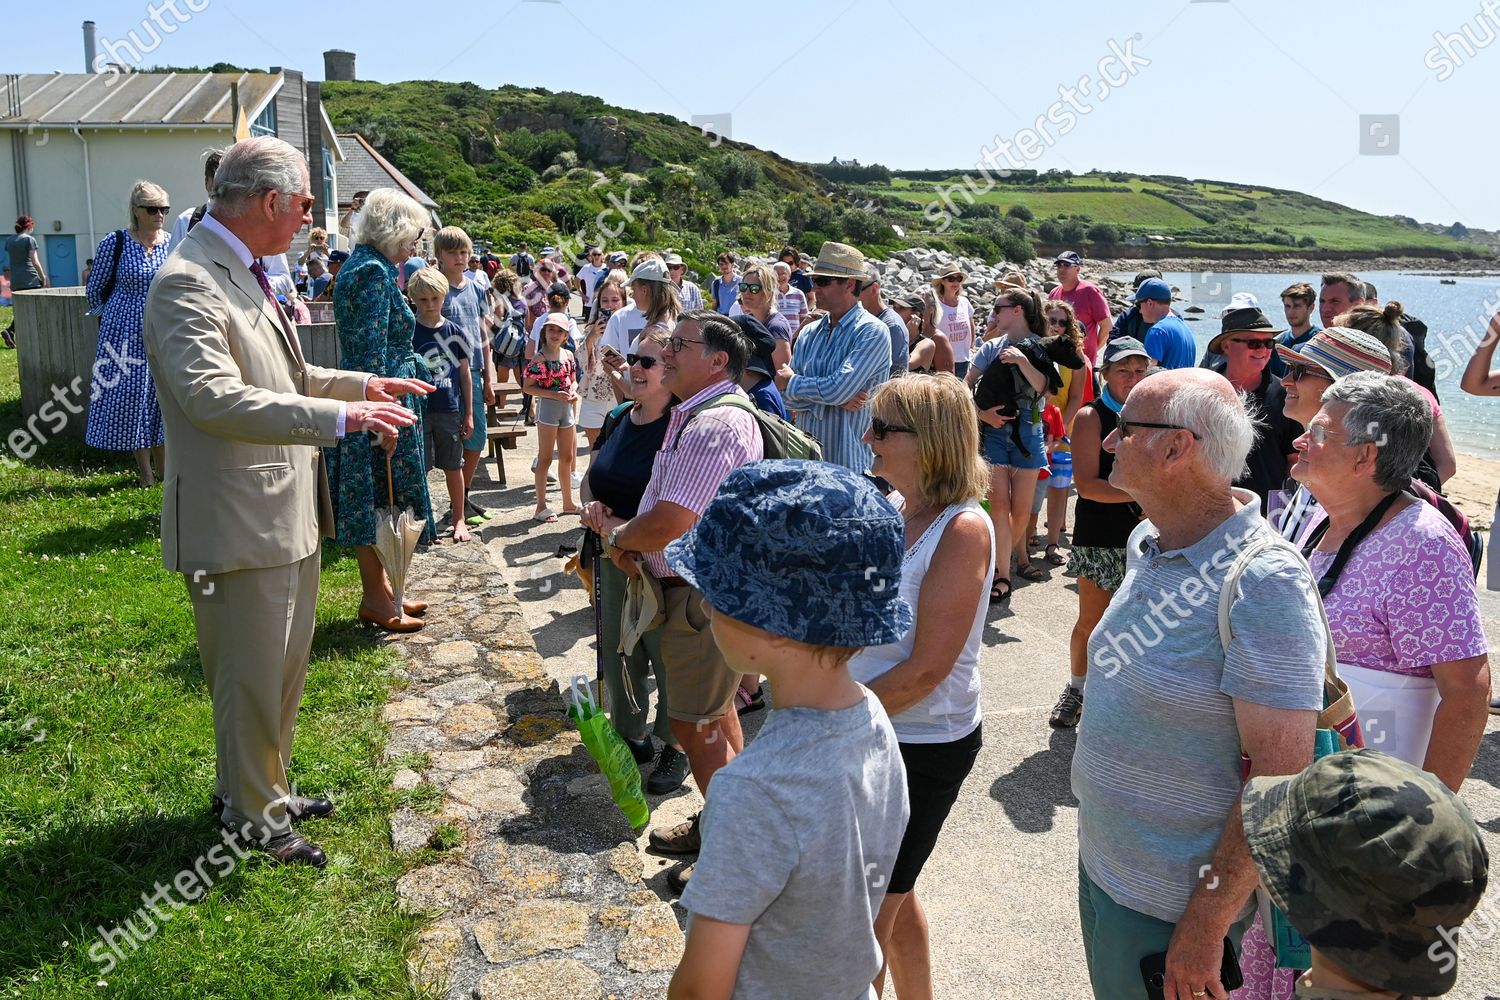 prince-charles-and-camilla-duchess-of-cornwall-visit-to-devon-and-cornwall-day-2-uk-shutterstock-editorial-12222608ay.jpg